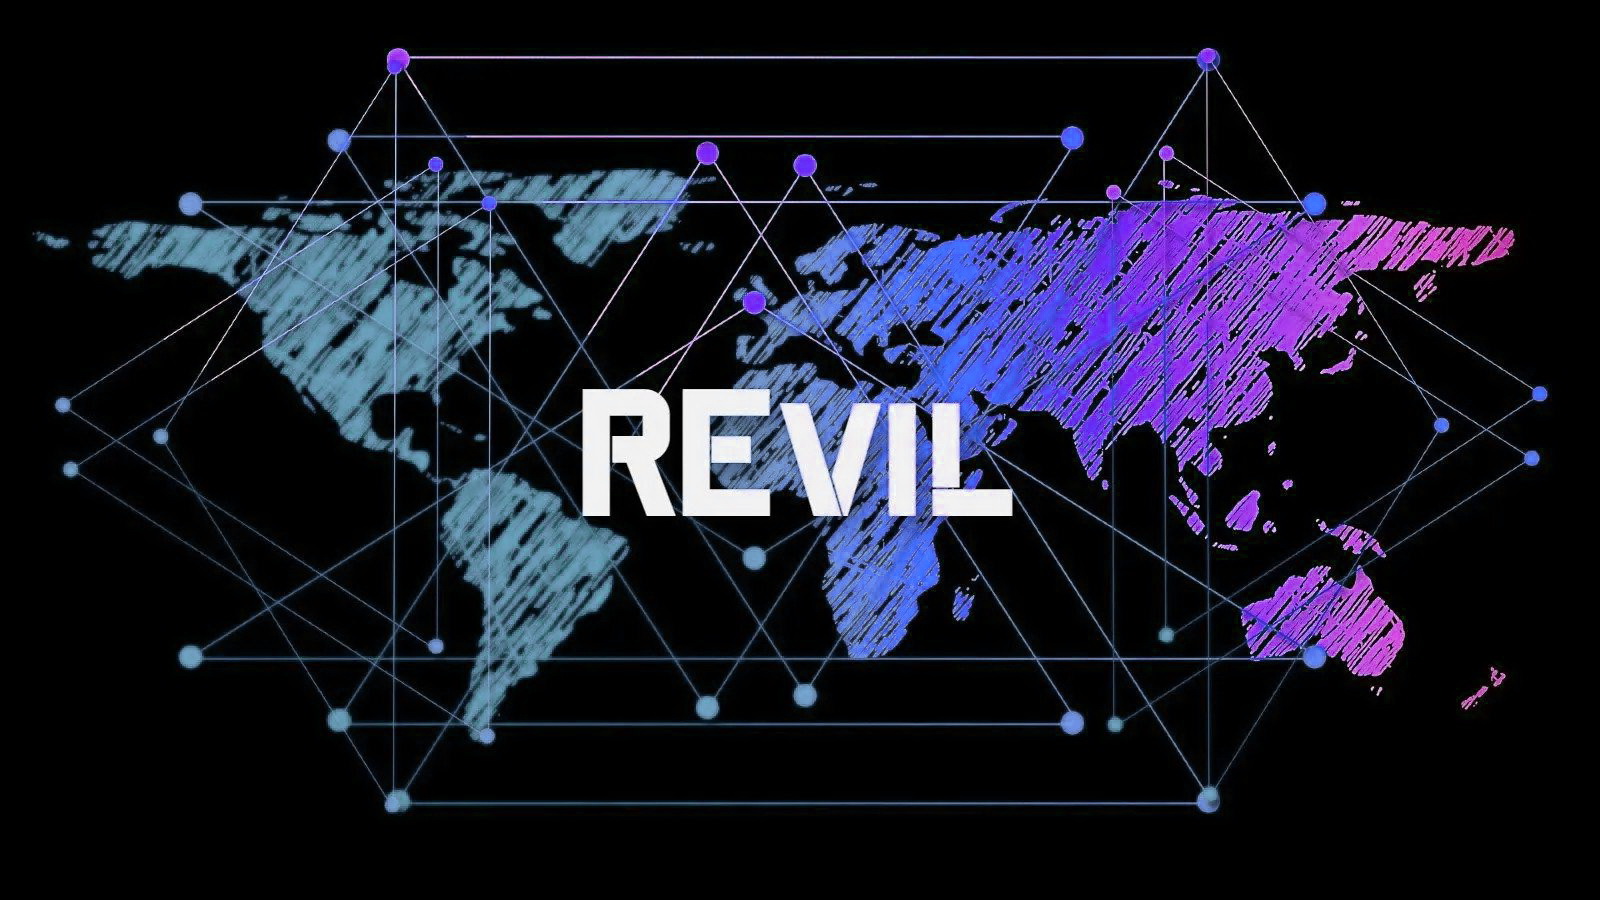 REvil stopped working again